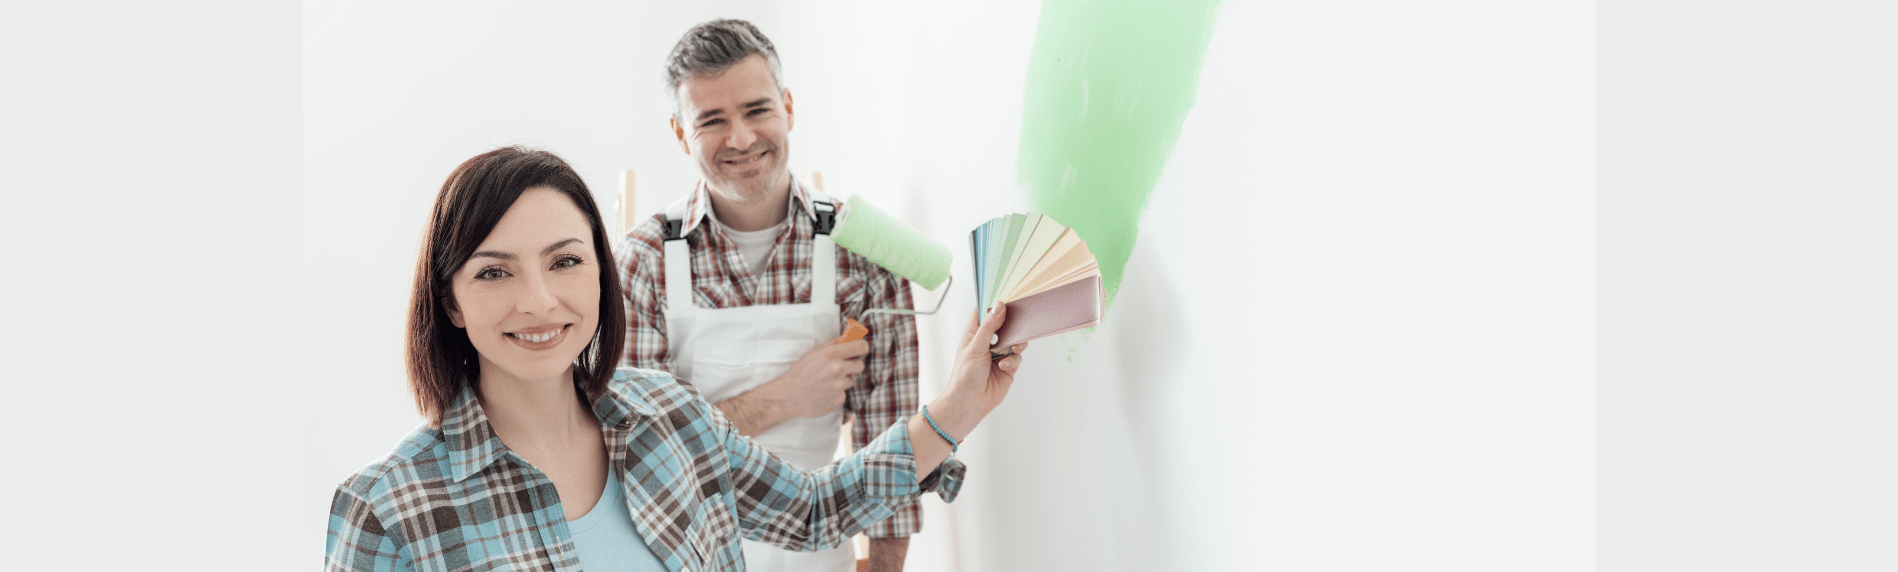 A man and woman choosing paint color